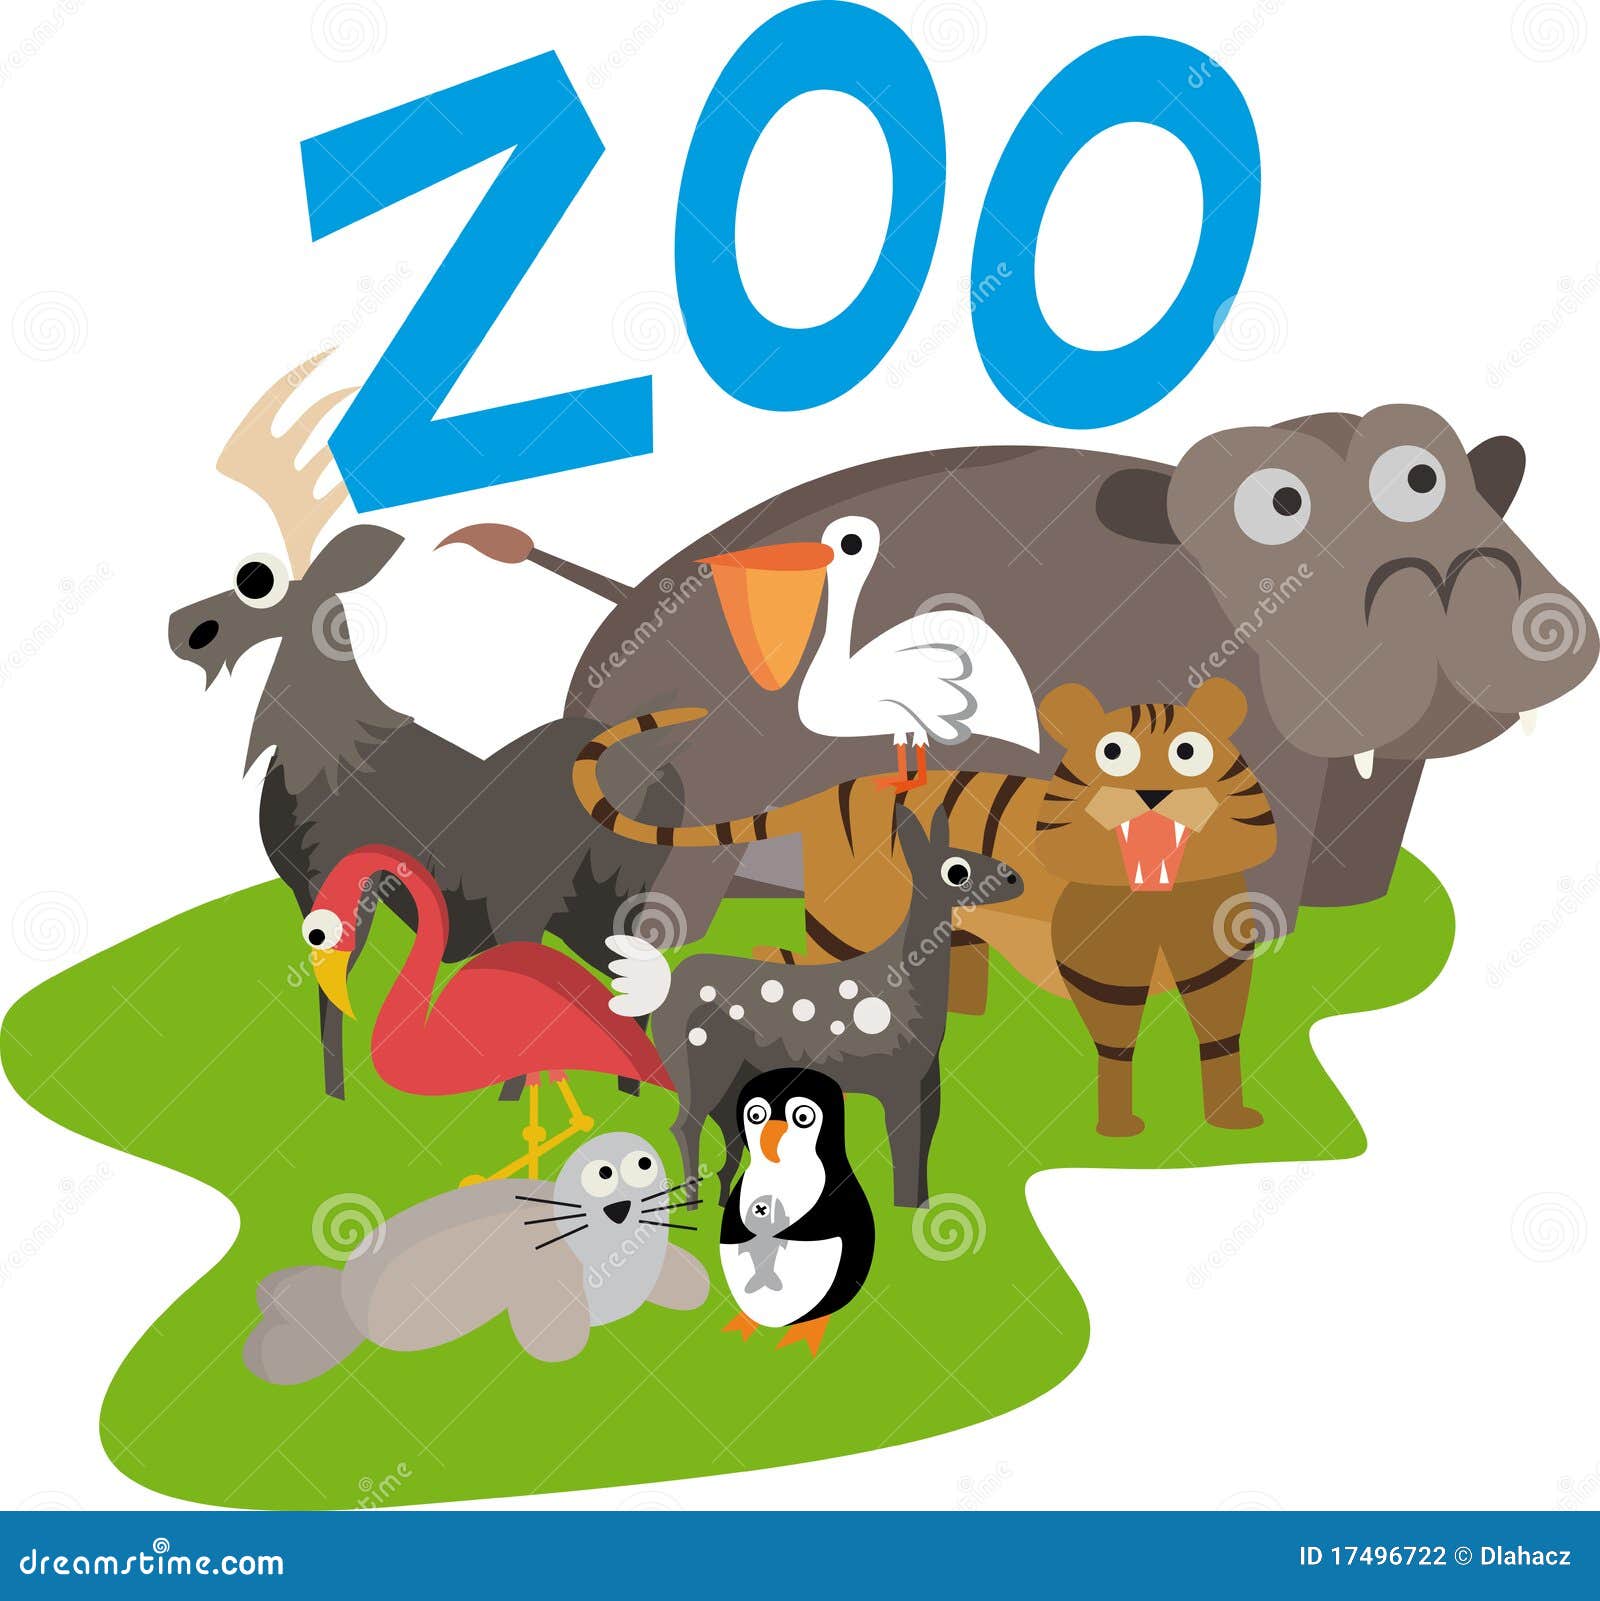 clipart picture of a zoo - photo #47